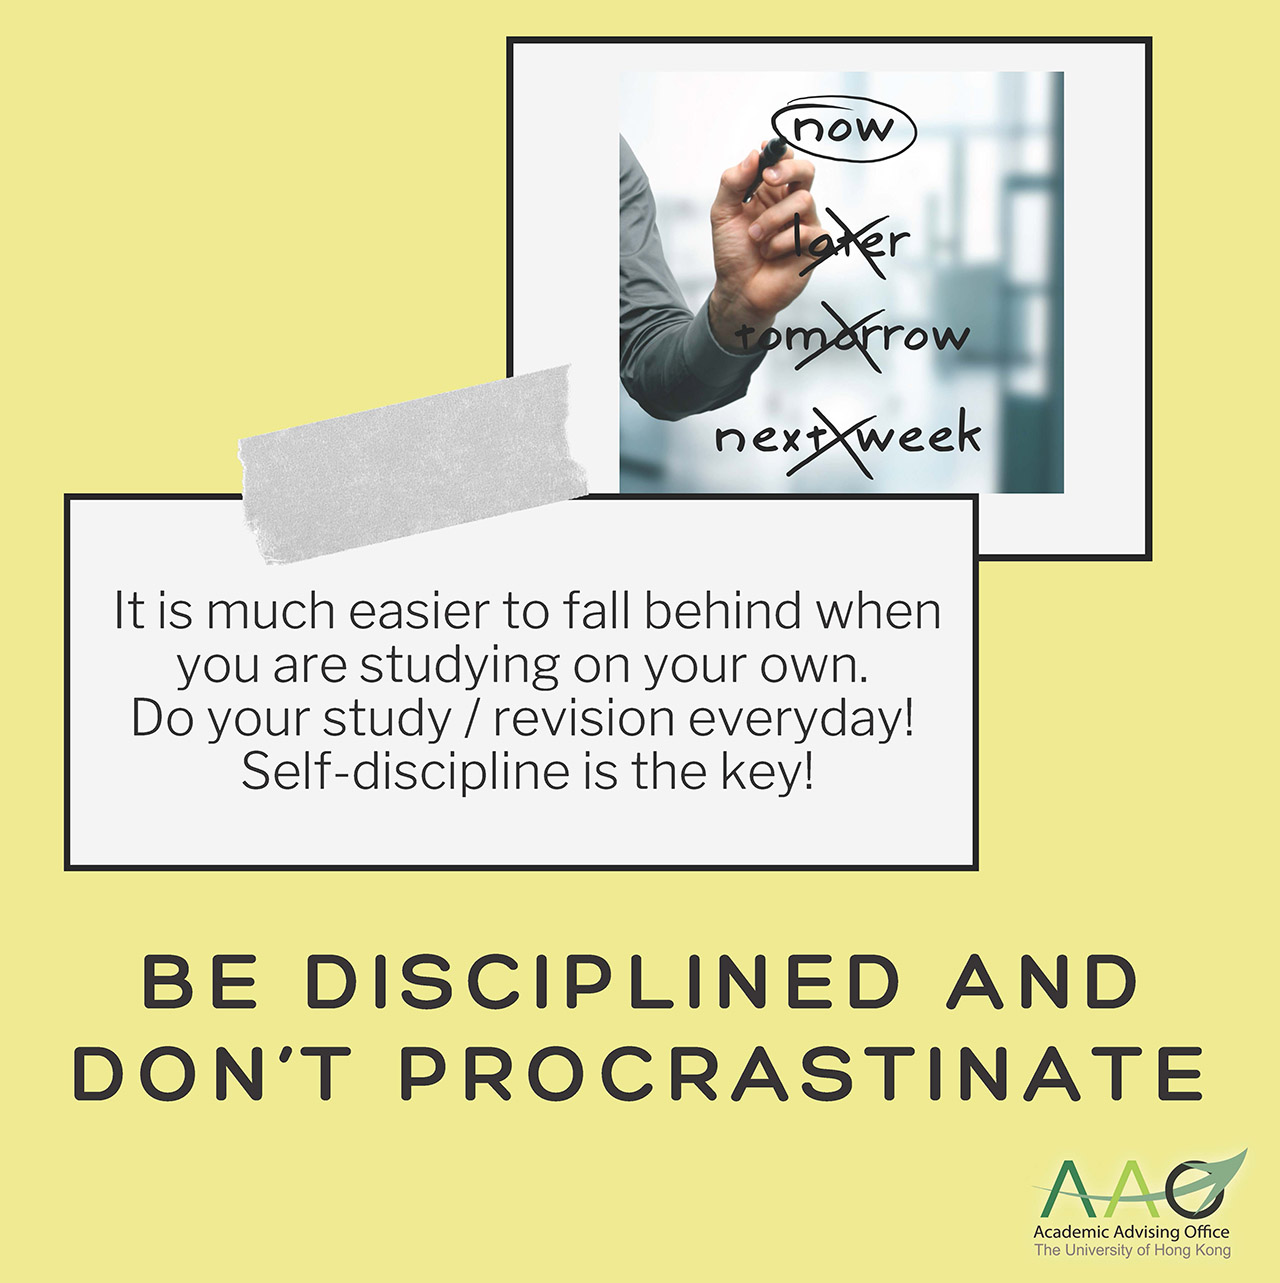 Be disciplined and don't procrastinate: It is much easier to fall behind when you are studying on your own. Do your study / revision everyday! Self-discipline is the key!